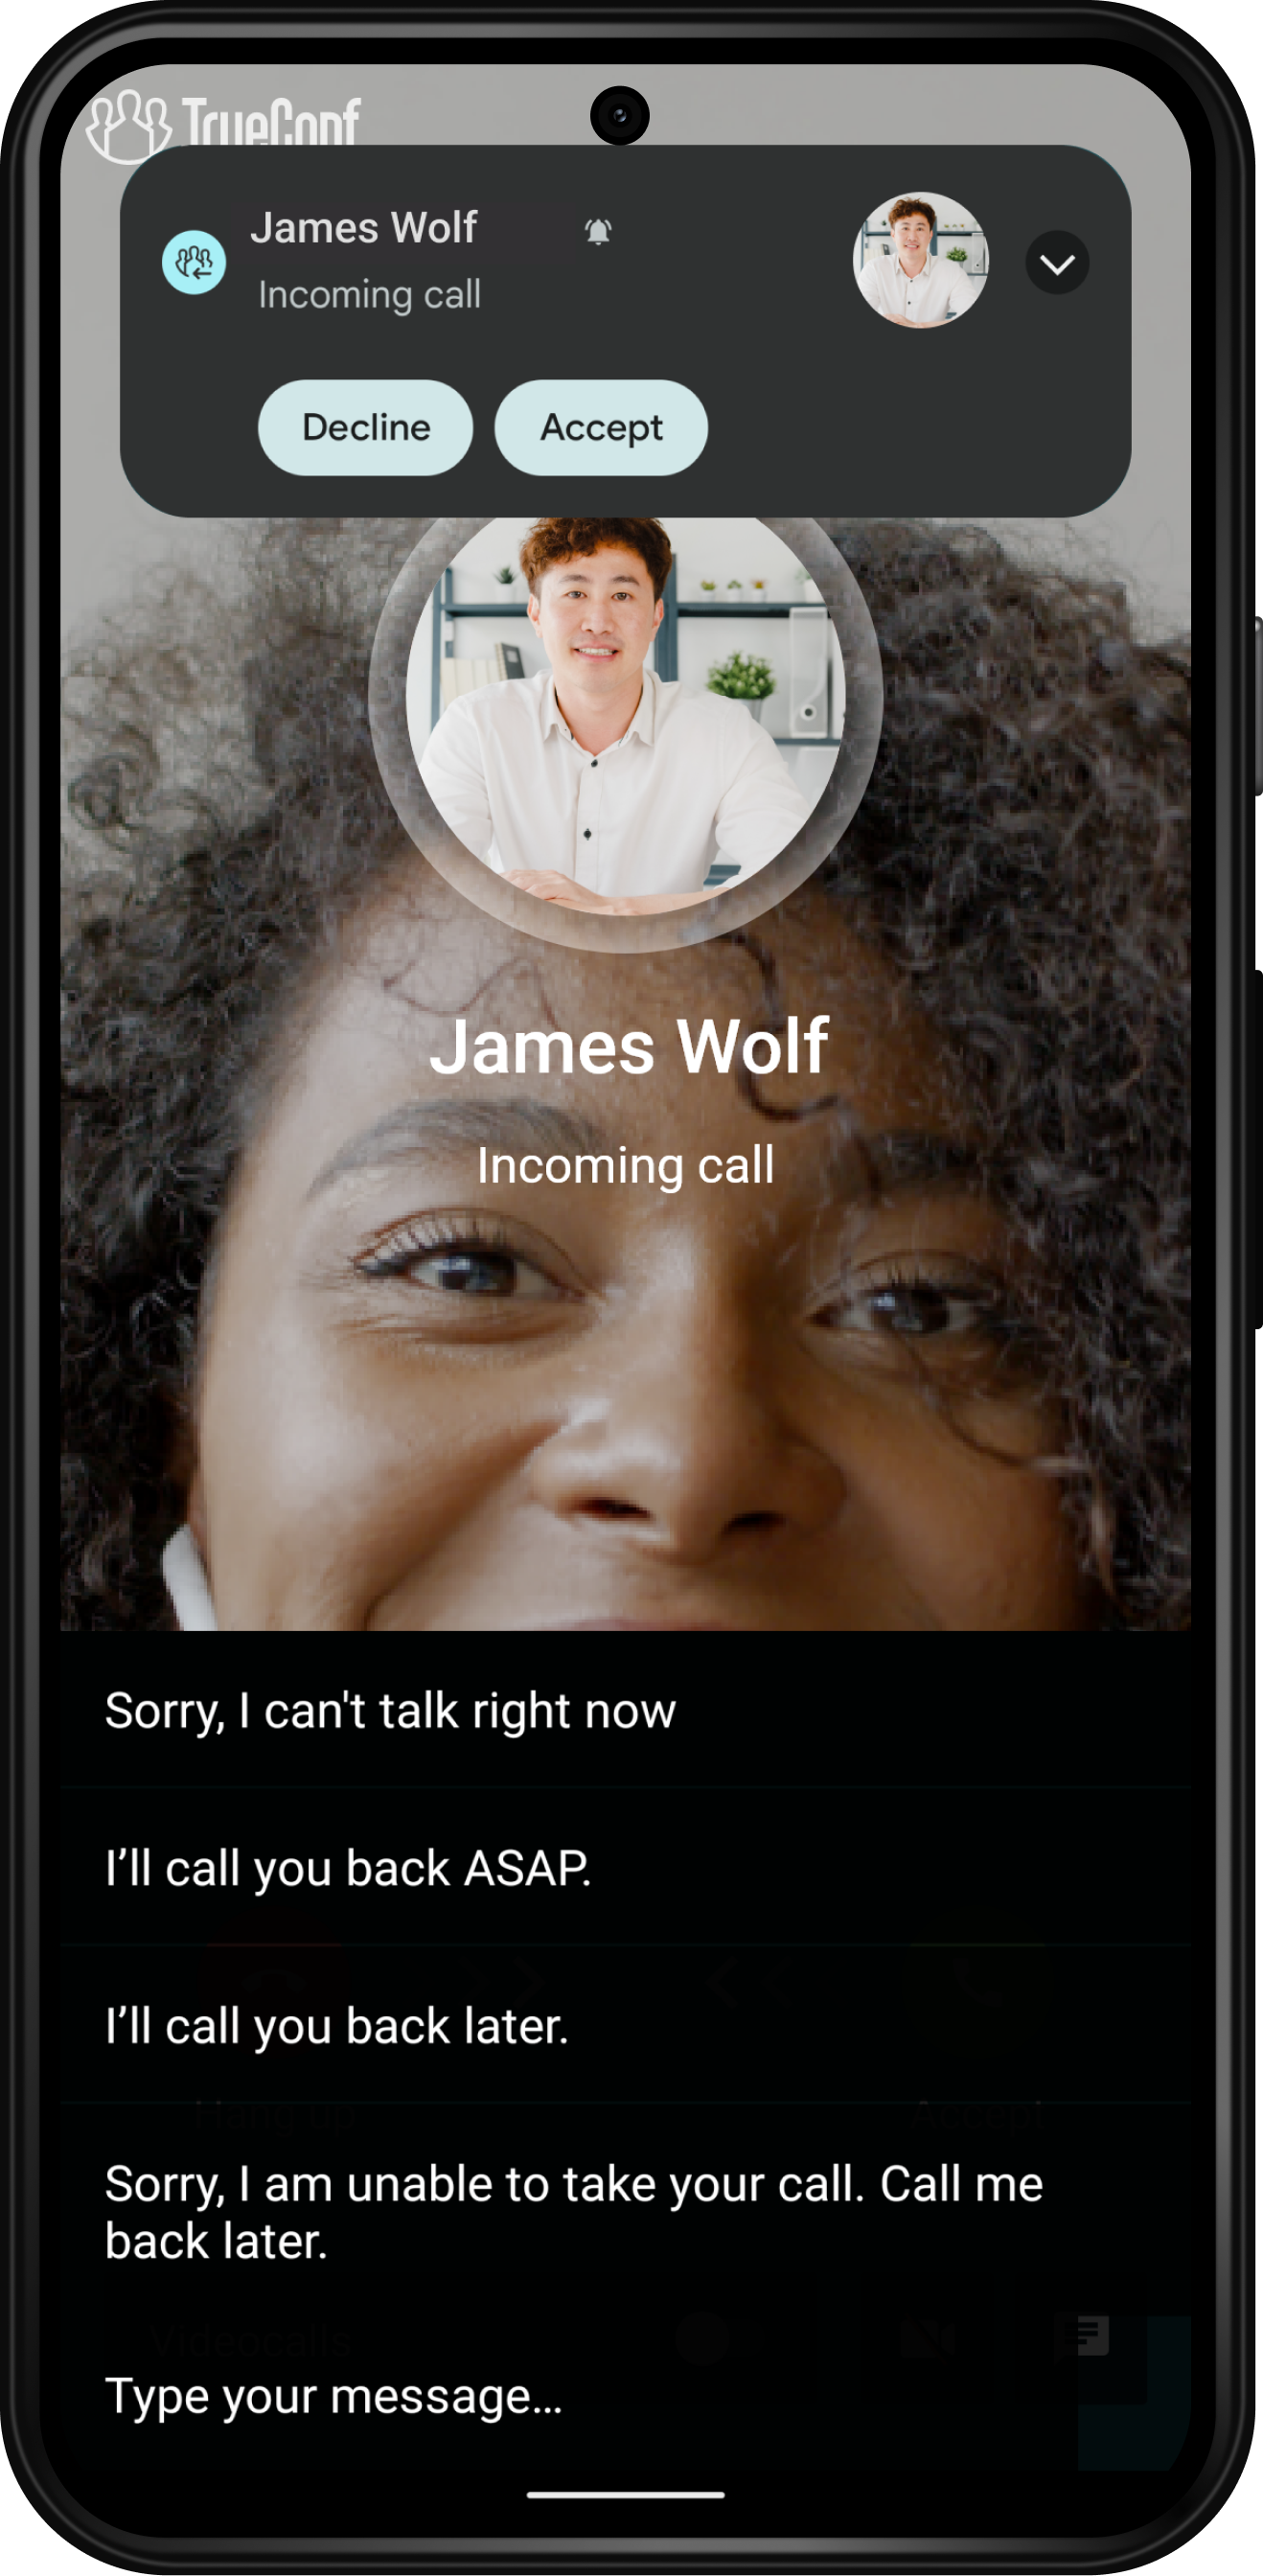 TrueConf 2.0 for Android: the all-in-one video conferencing & team messaging app 40